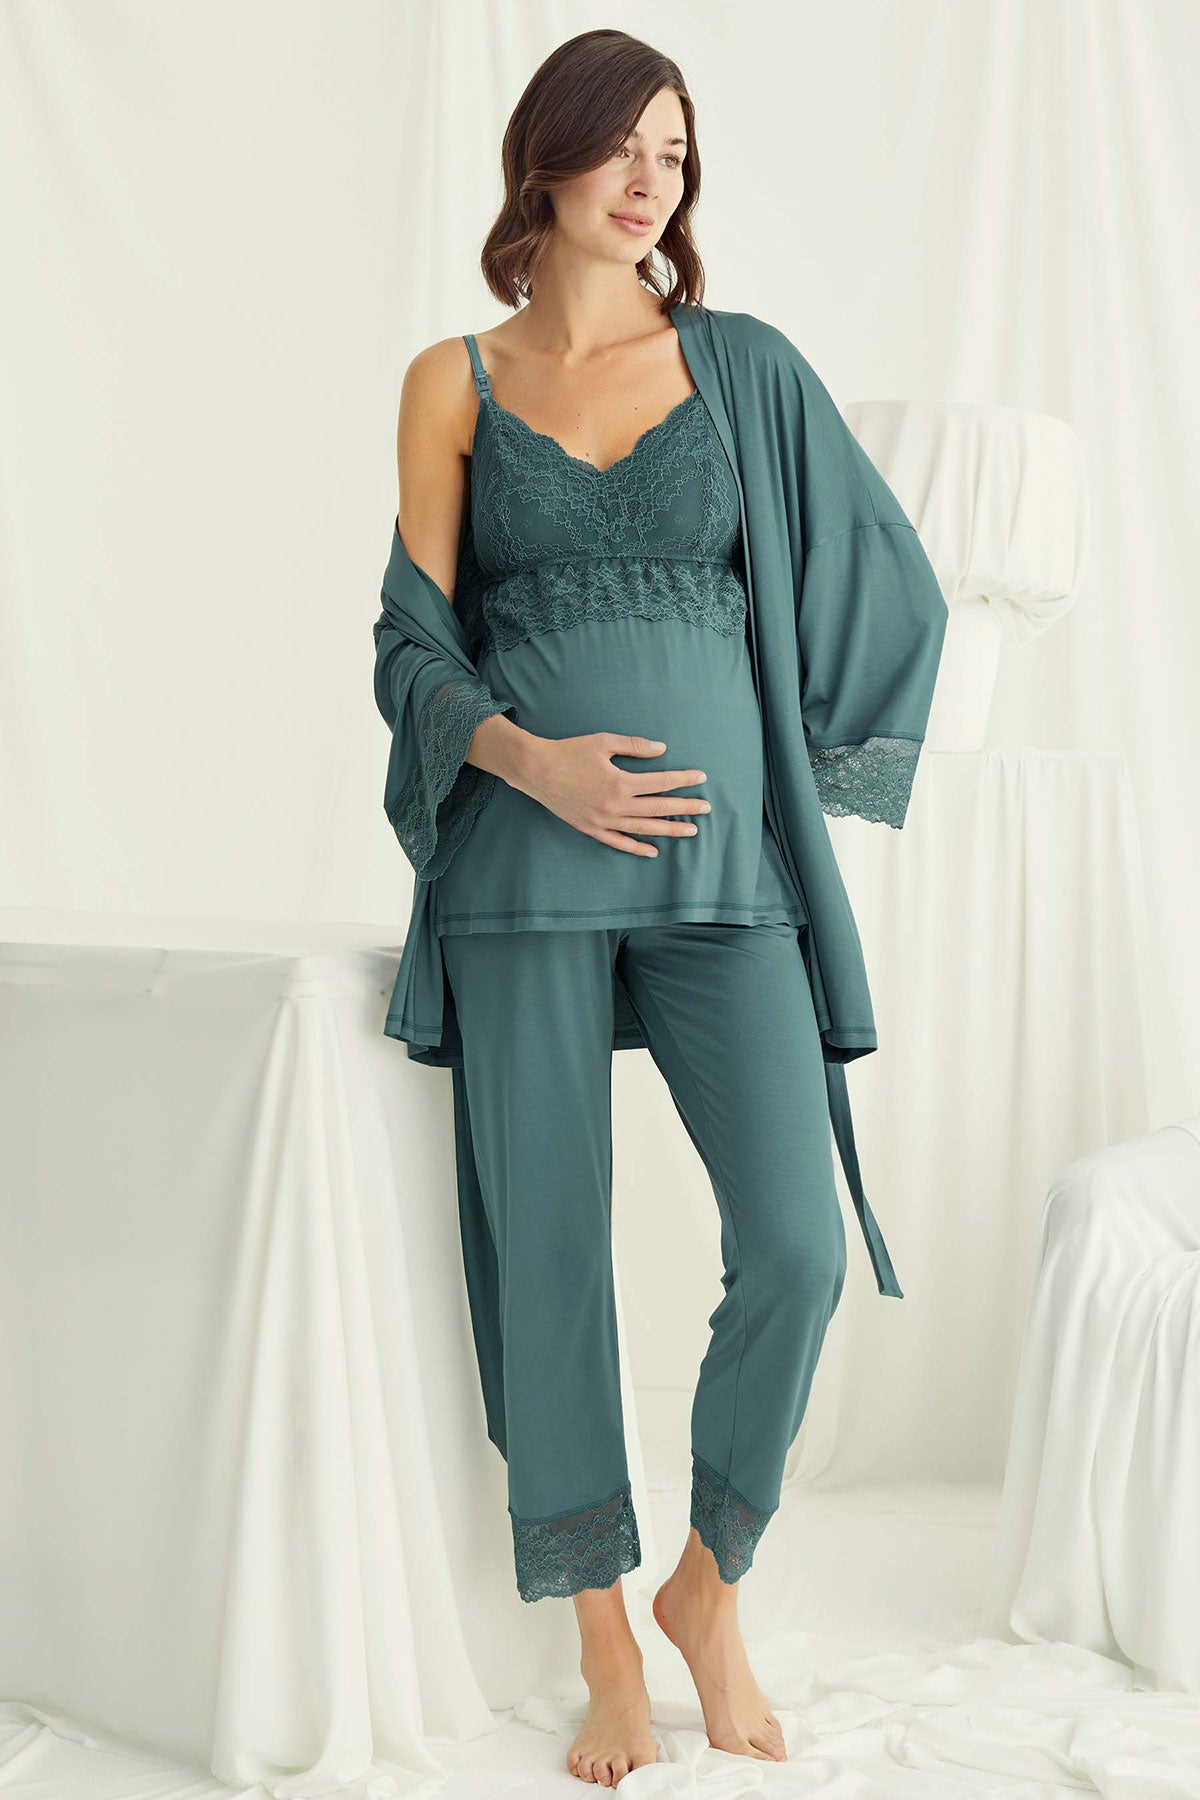 Shopymommy 18523 Lace Strappy 3-Pieces Maternity & Nursing Pajamas With Robe Green